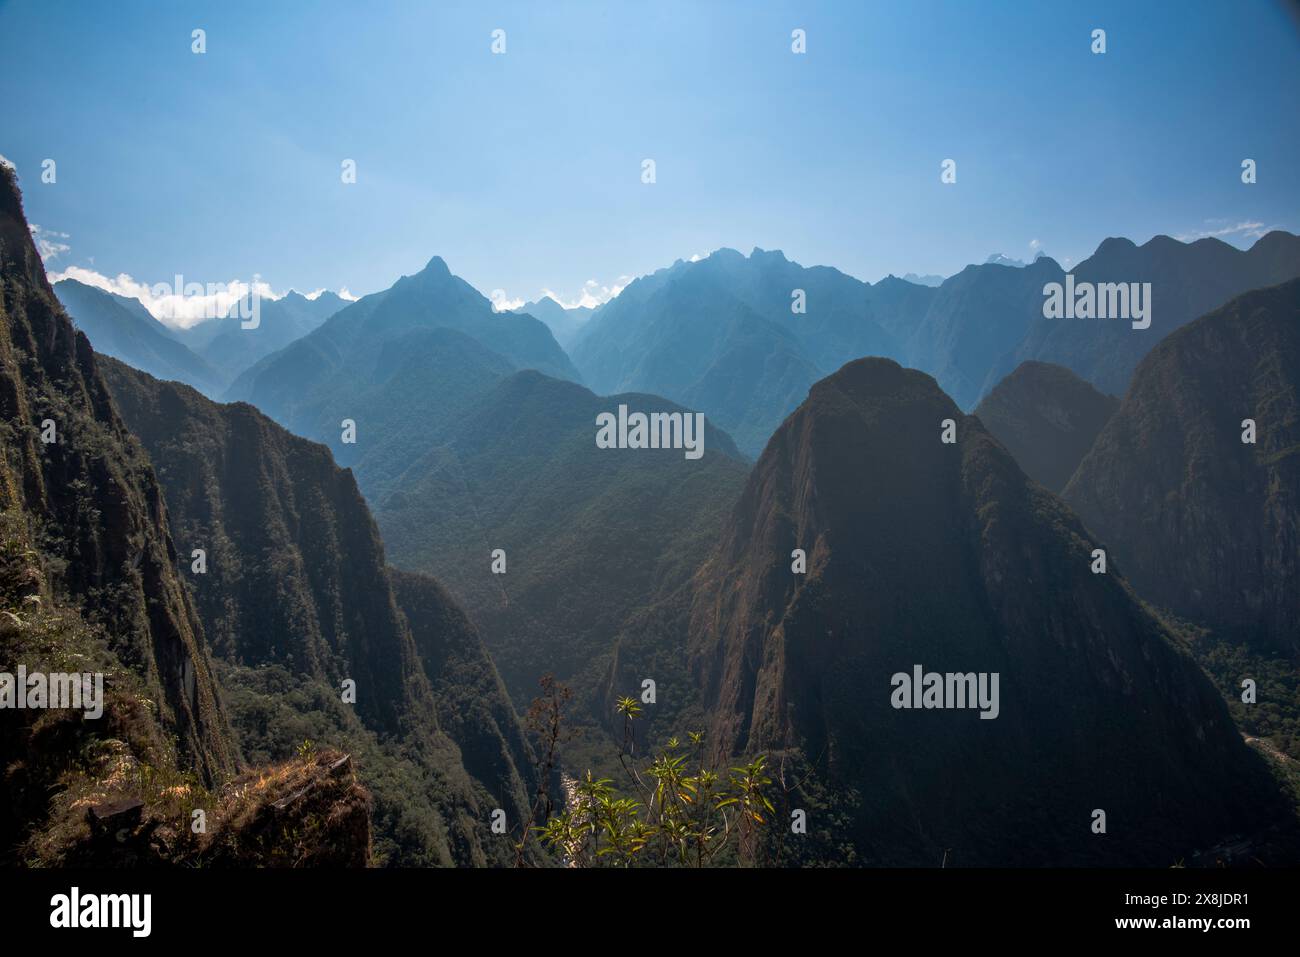 mountain peaks of the Cordillera Eastern in southern Peru in the province of Urubamba among deep gorges and canyons full of tropical vegetation in the Stock Photo